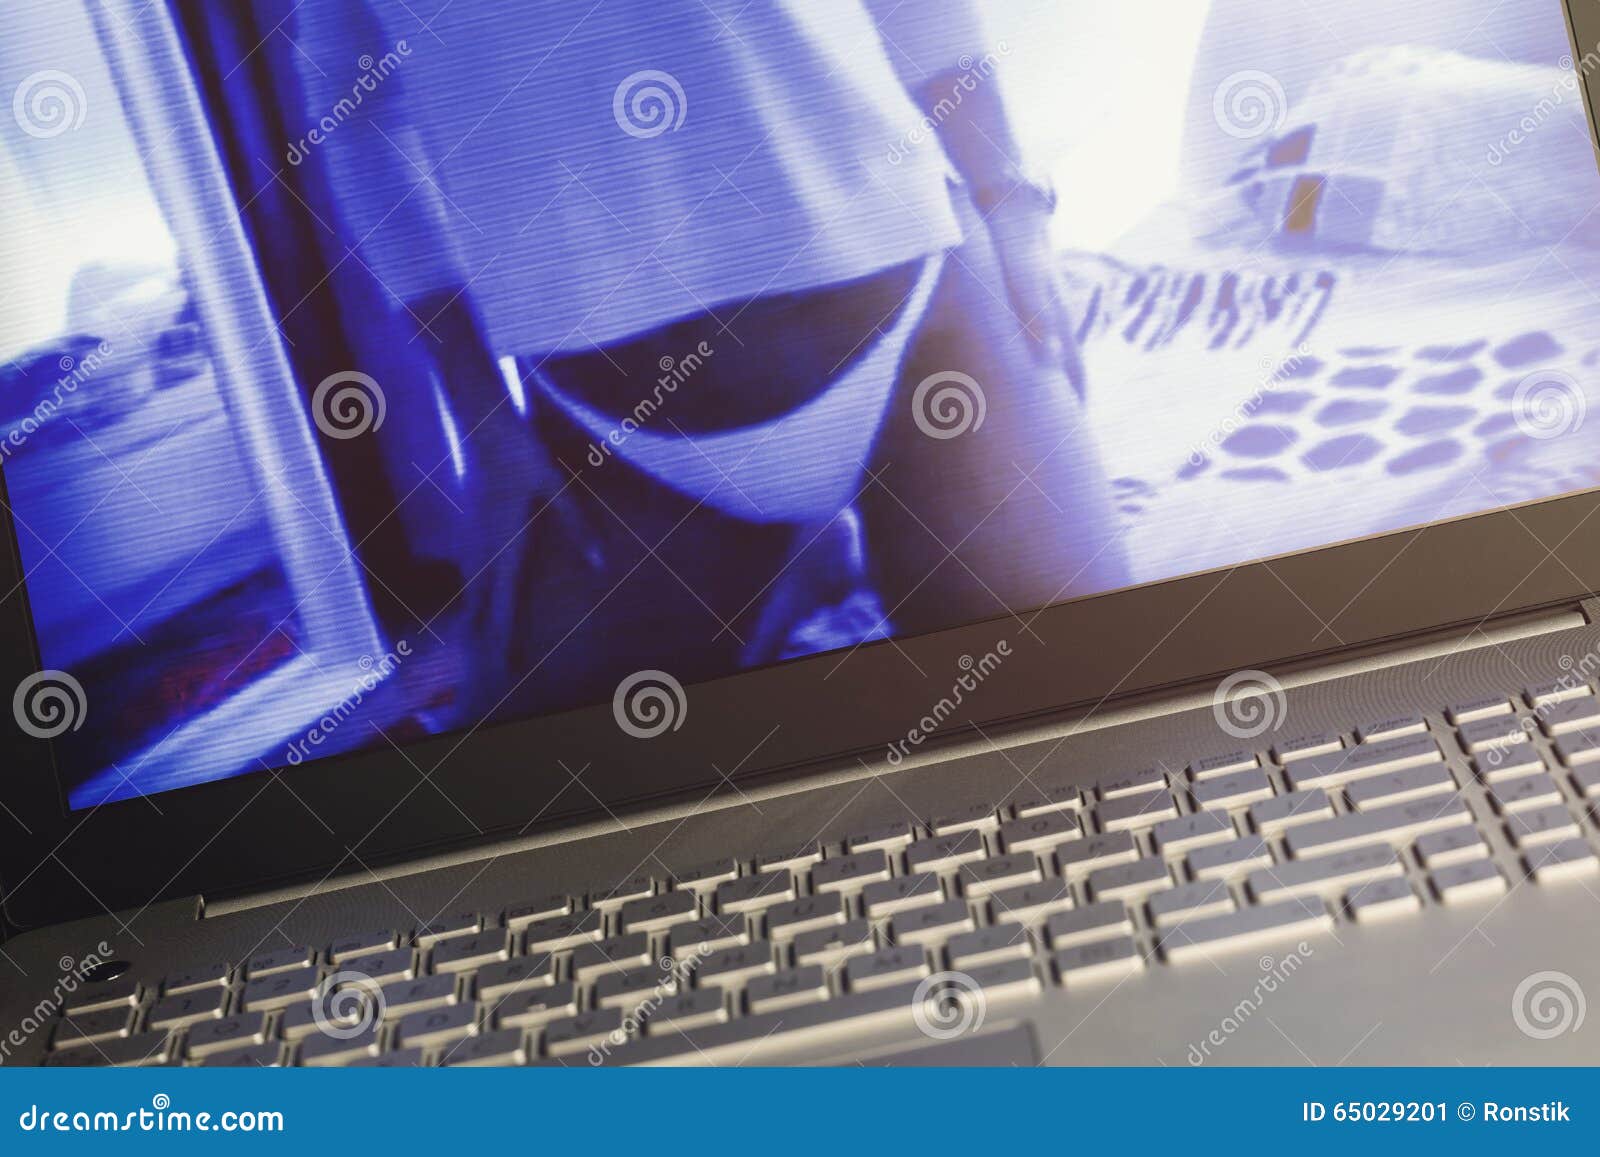 Online Sex Video Chat On Laptop Stock Image - Image of people, bedroom ...